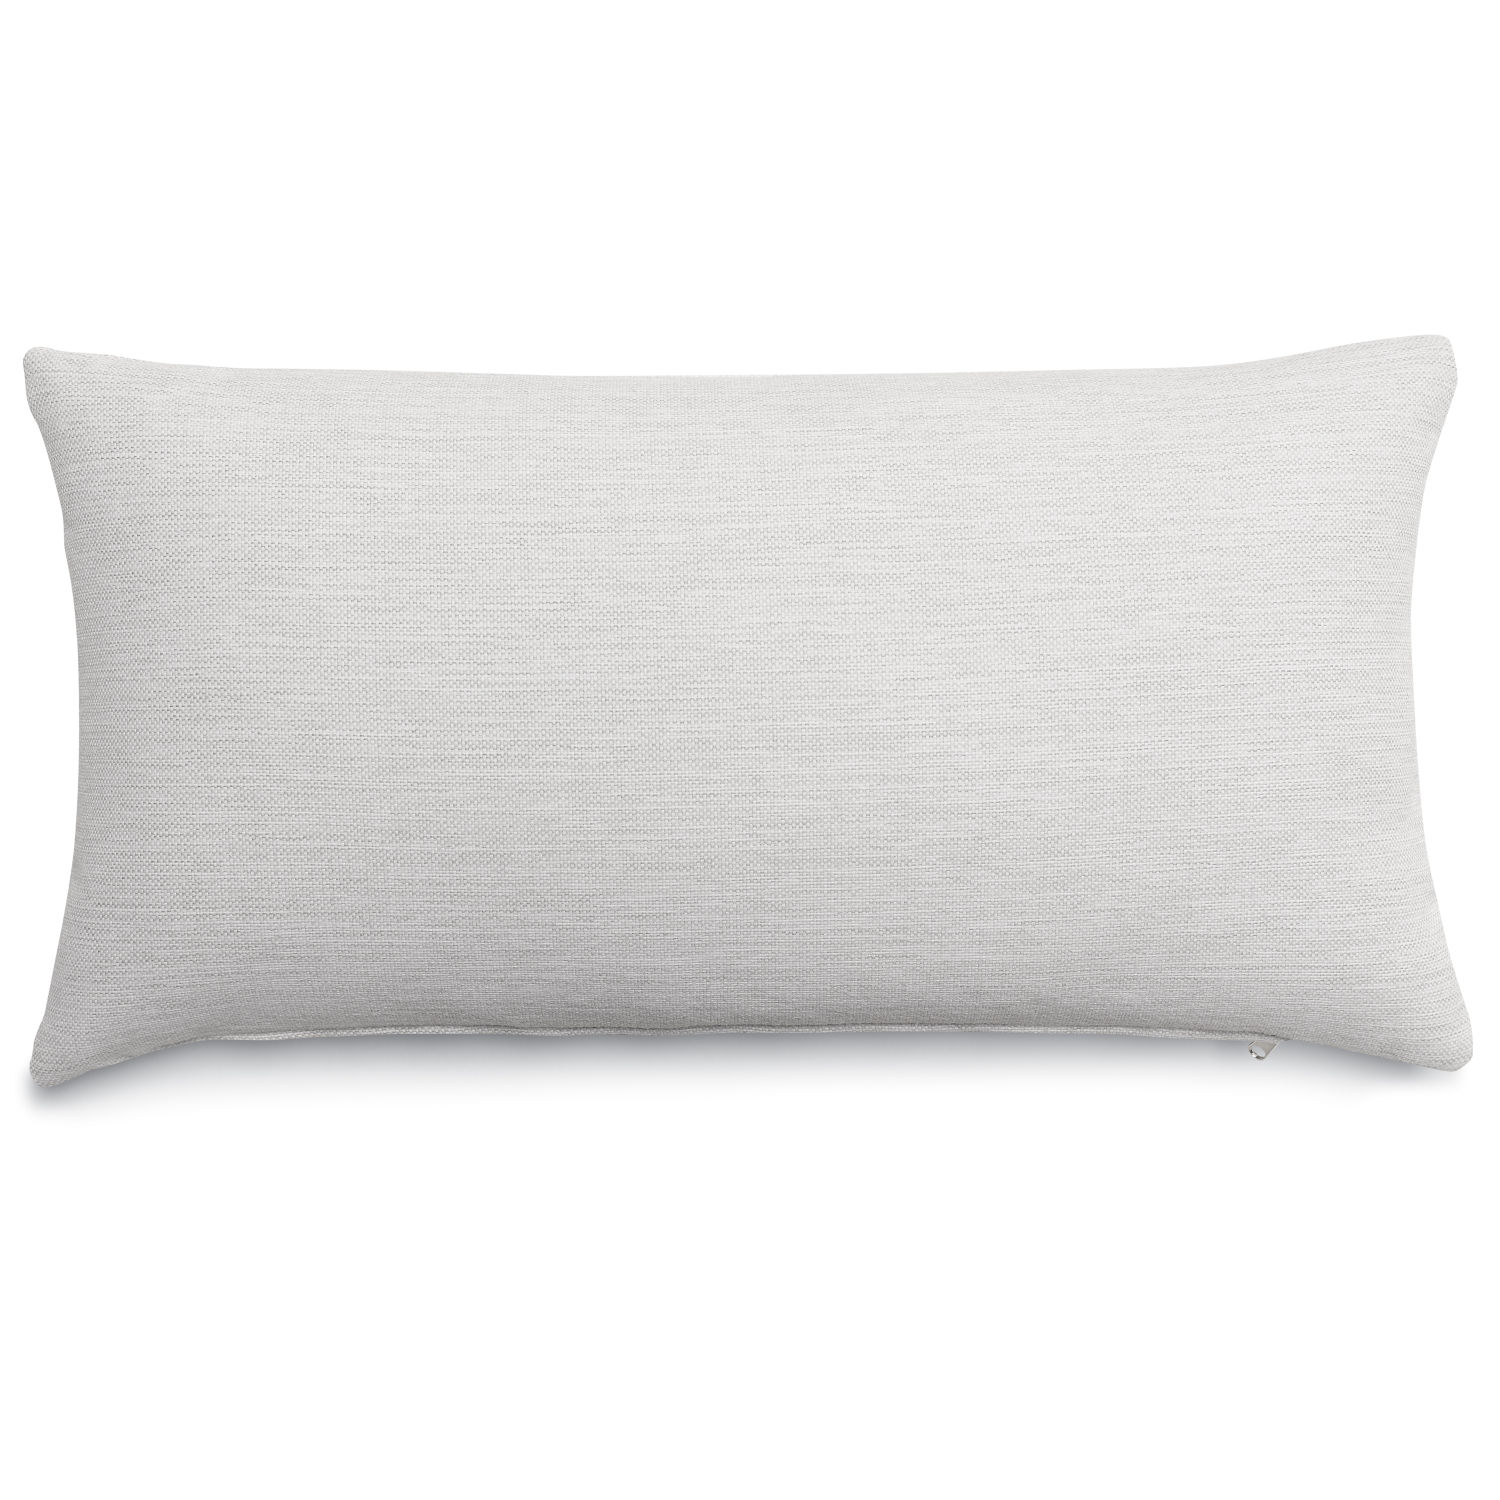 Patio Cushions & Pillows Category